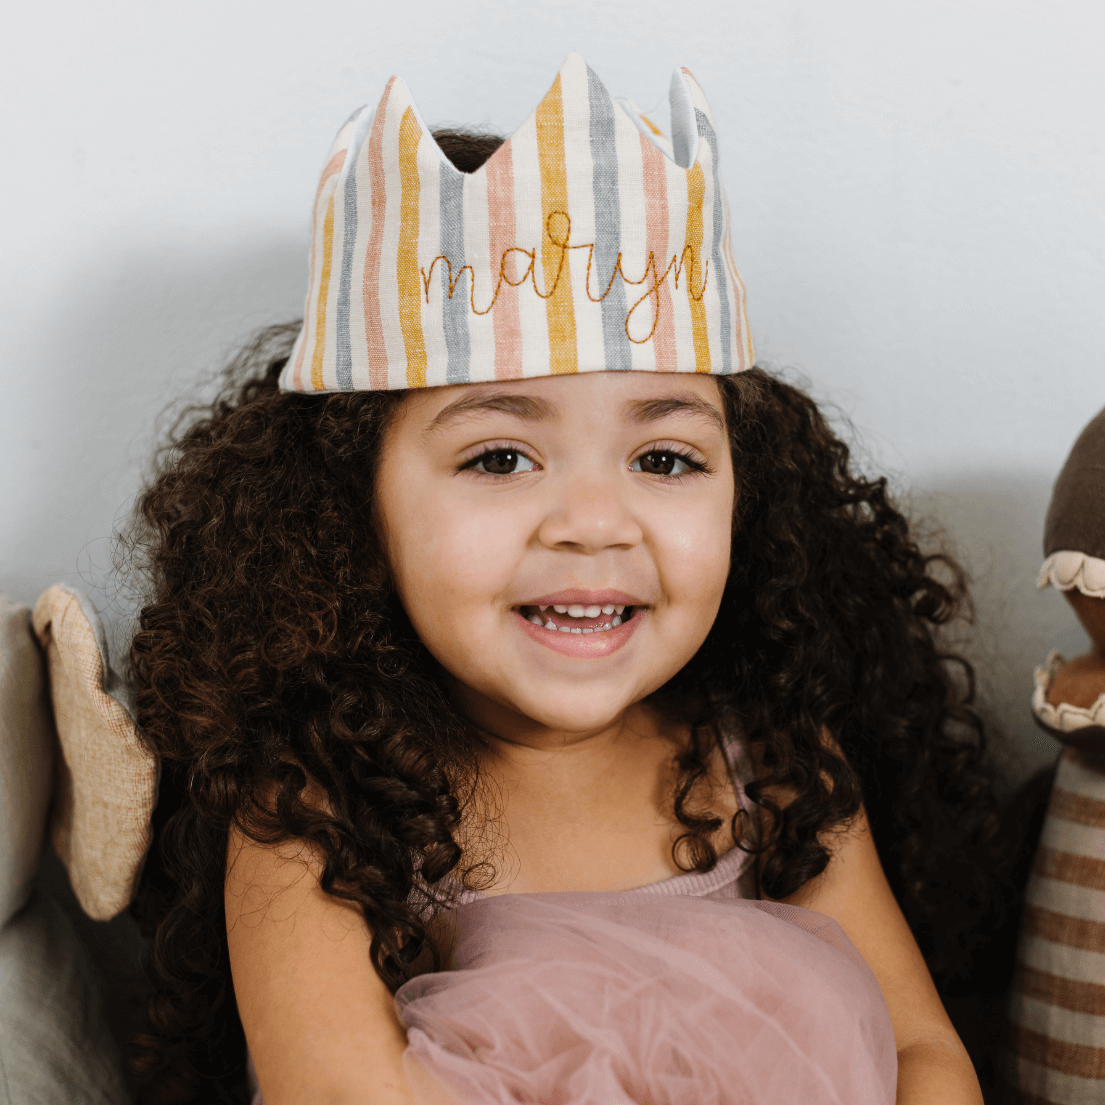 Striped Birthday Crown | "This crown is simply adorable."